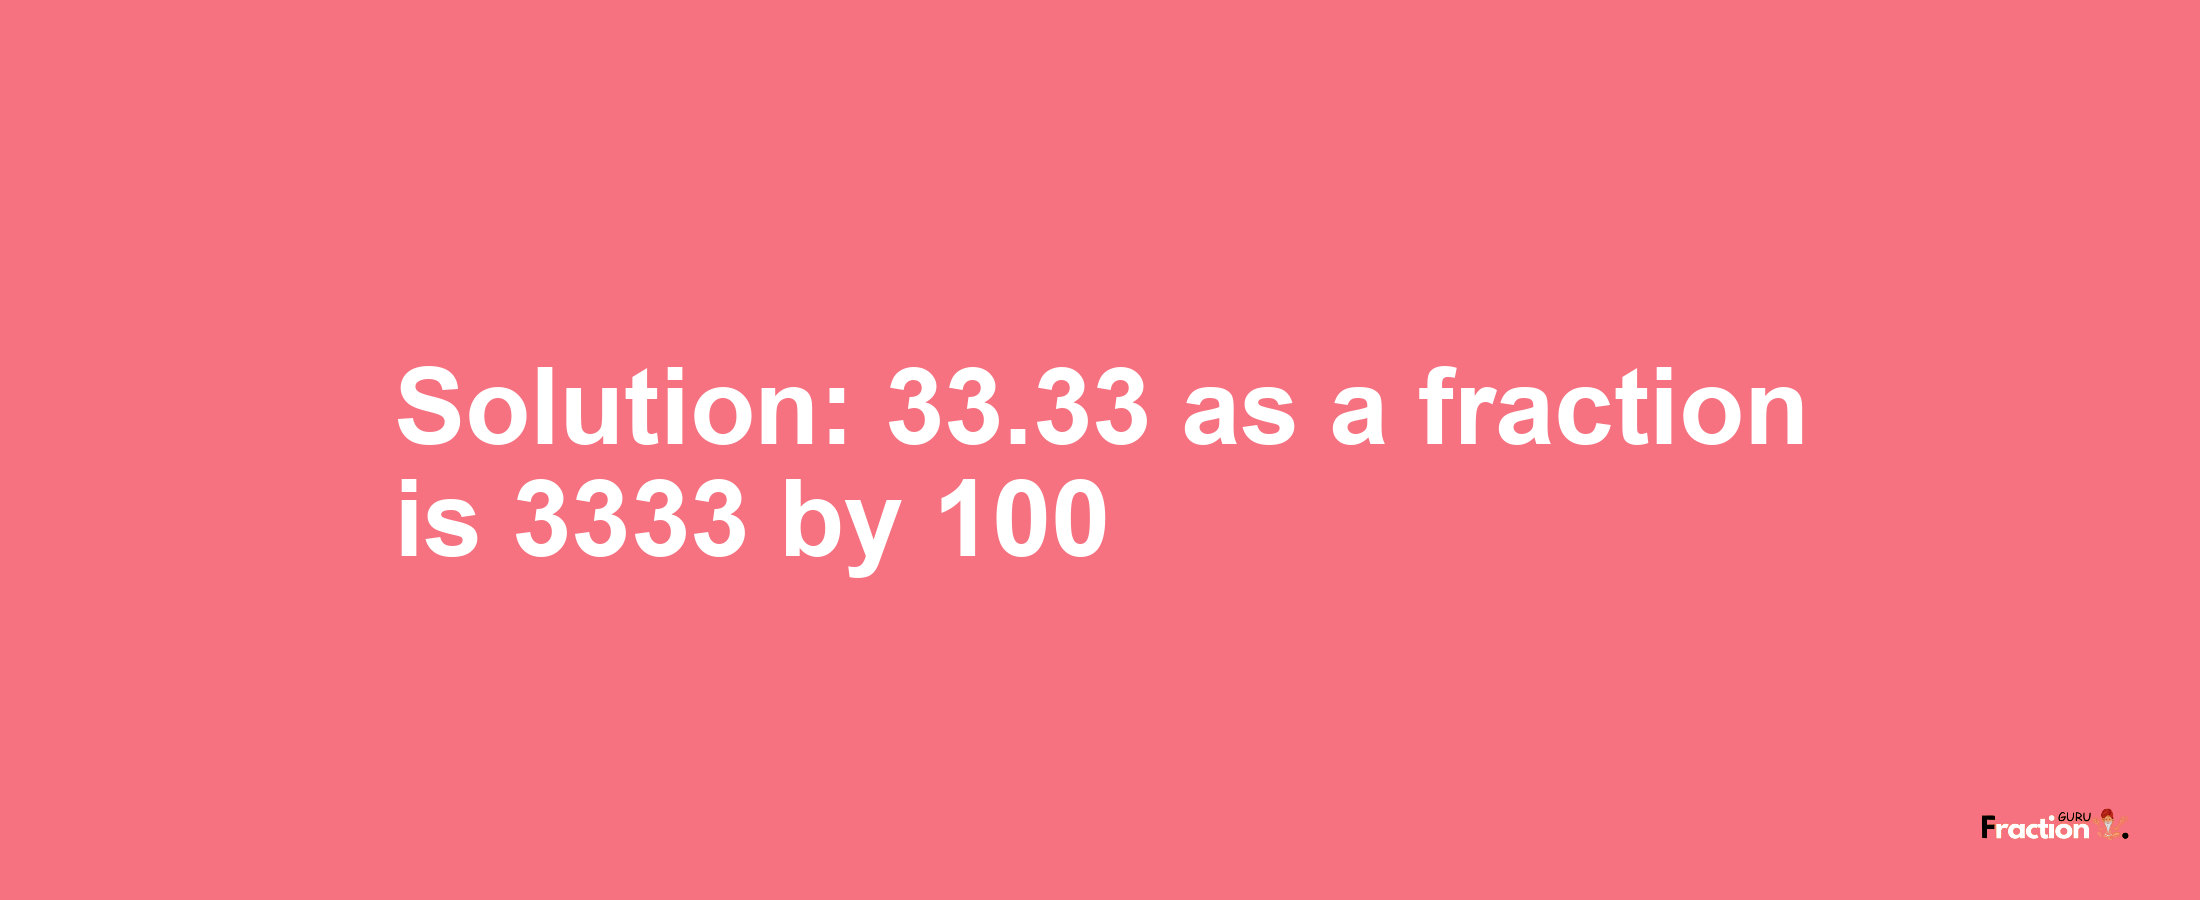 Solution:33.33 as a fraction is 3333/100